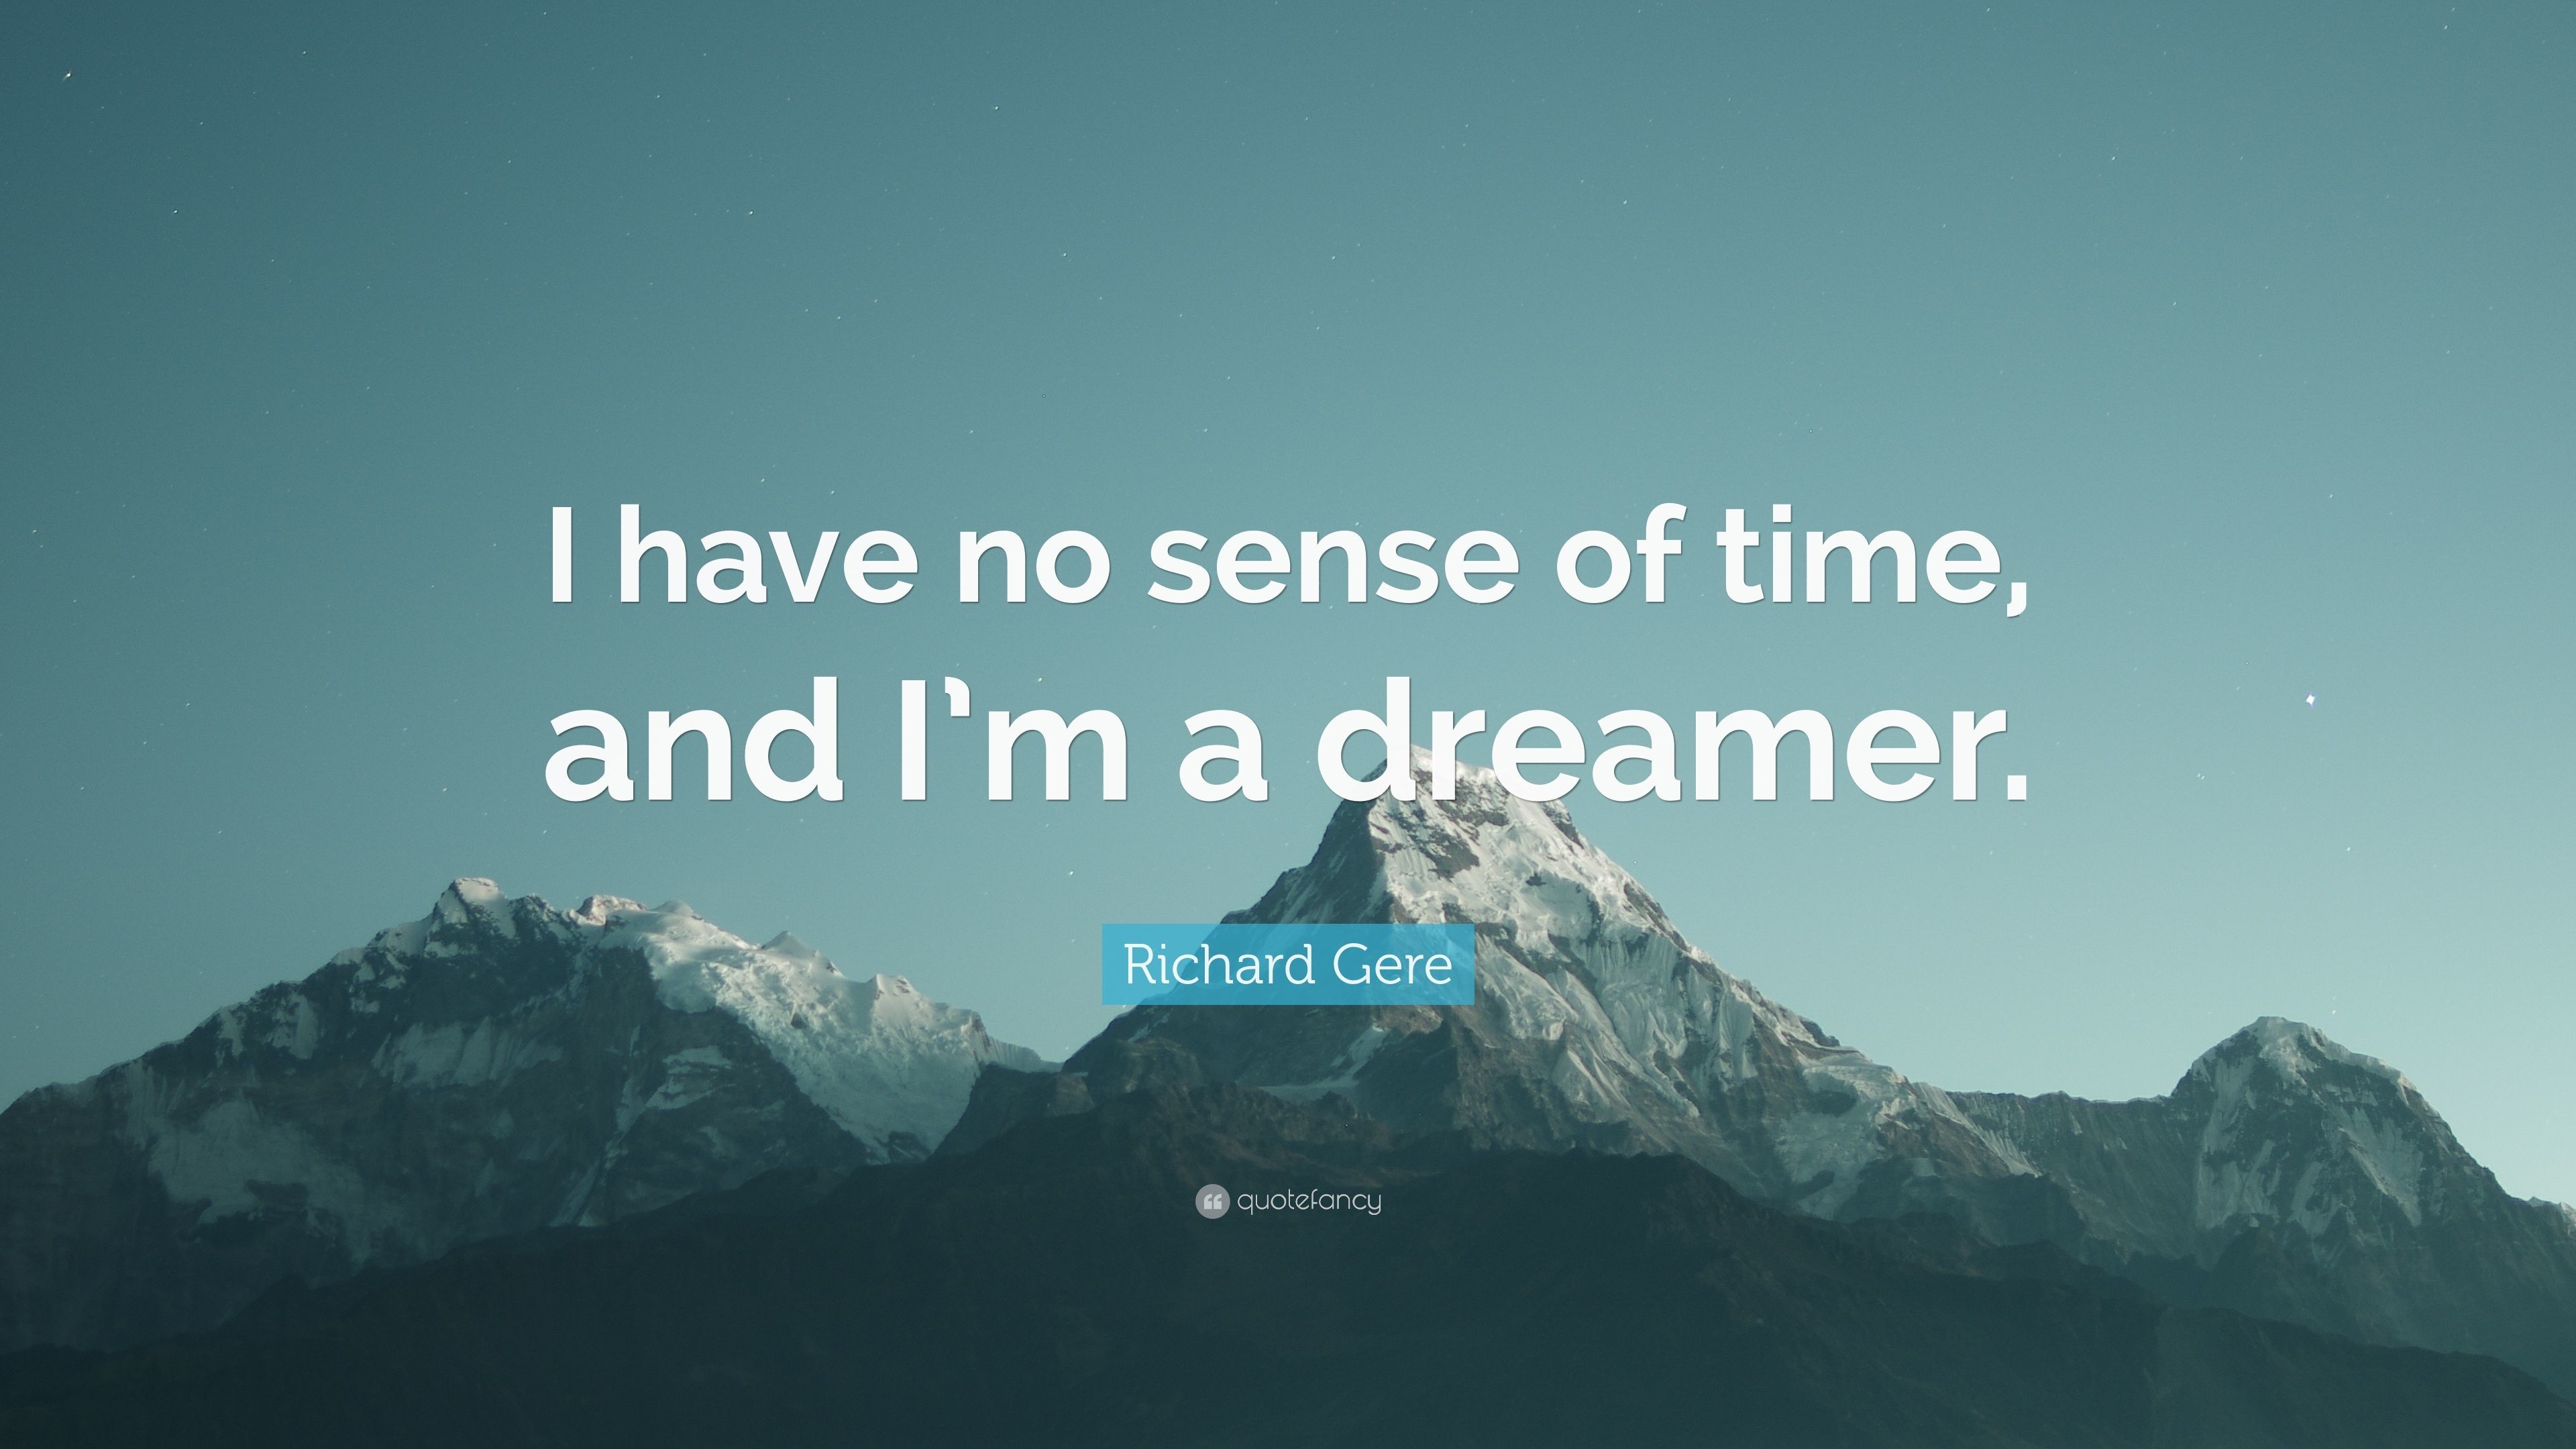 3840x2160 Richard Gere Quote: “I have no sense of time, and I'm